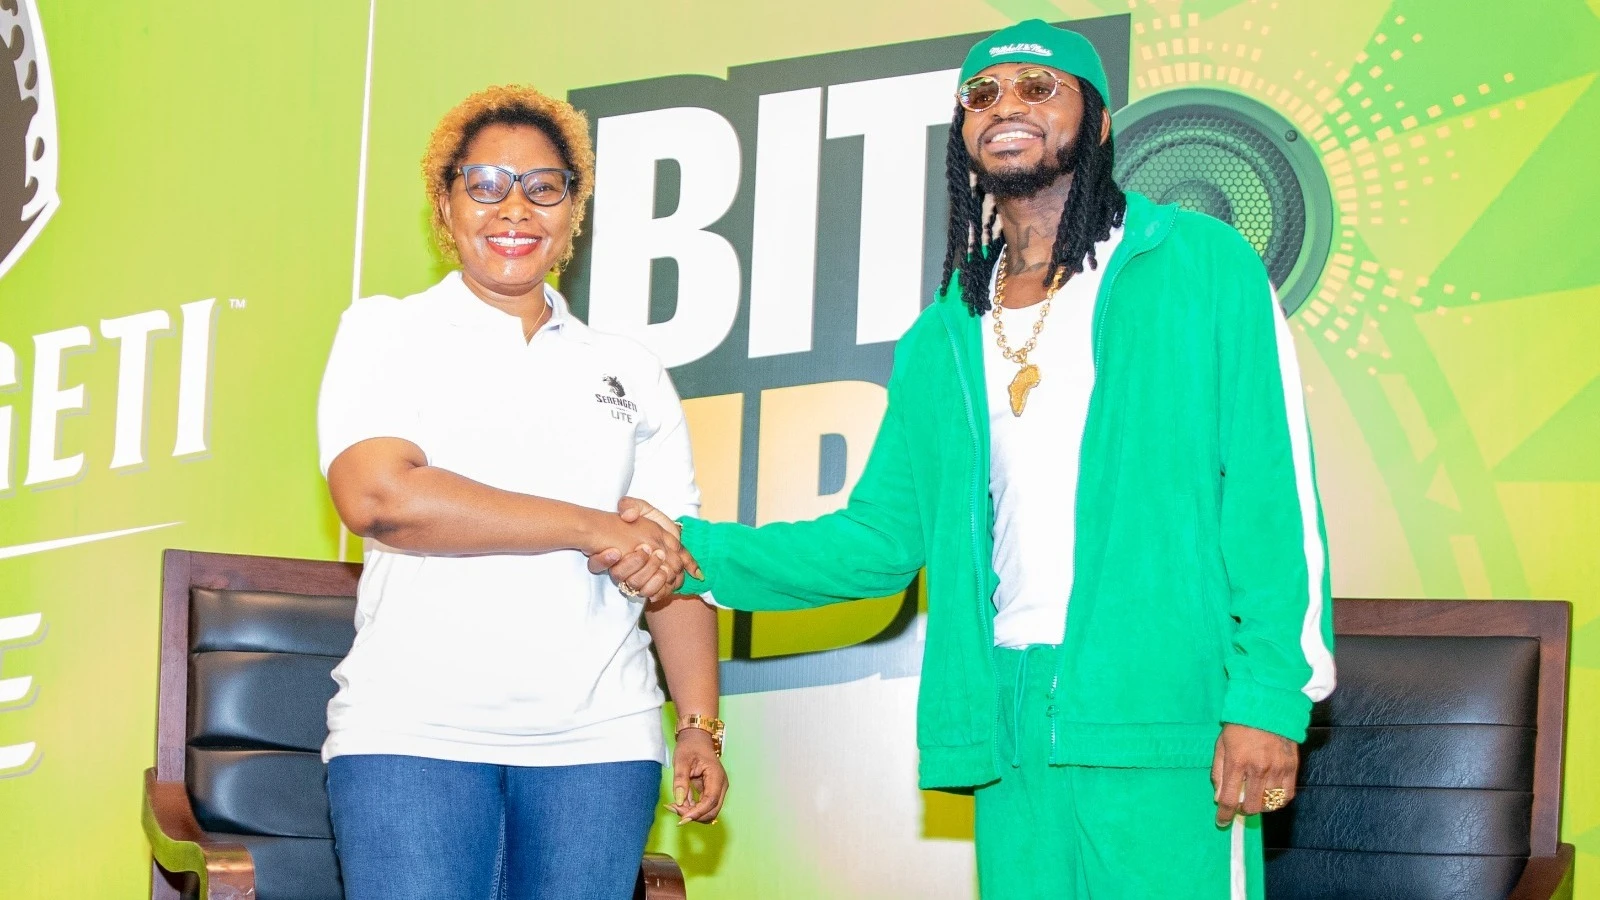 The Senior Brand Manager of SBL, Ester Raphael (left), and music artist Diamond Platnumz (right) in front of journalists (not pictured) when they announced their partnership for the music and cultural festival to be held on April 26th and 27th.